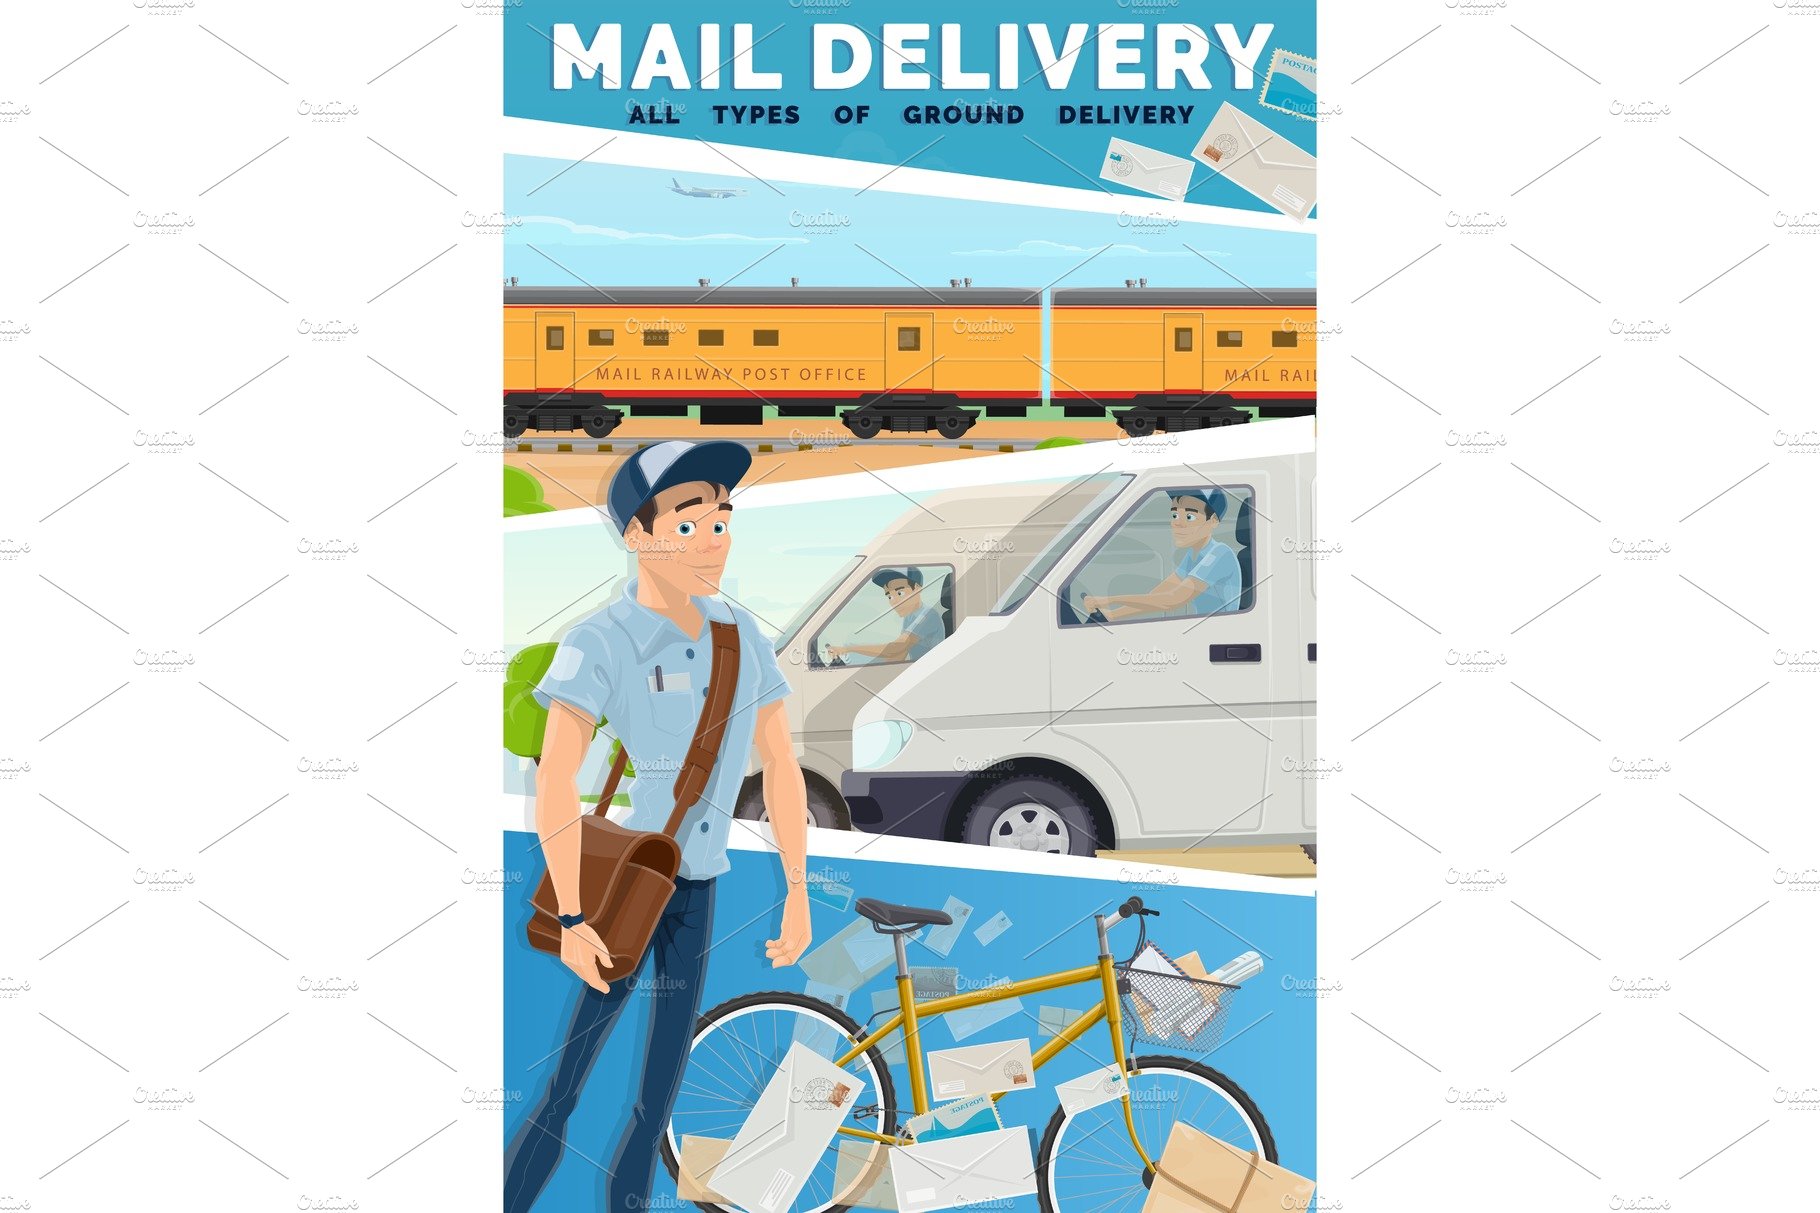 Express delivery mail and parcel cover image.